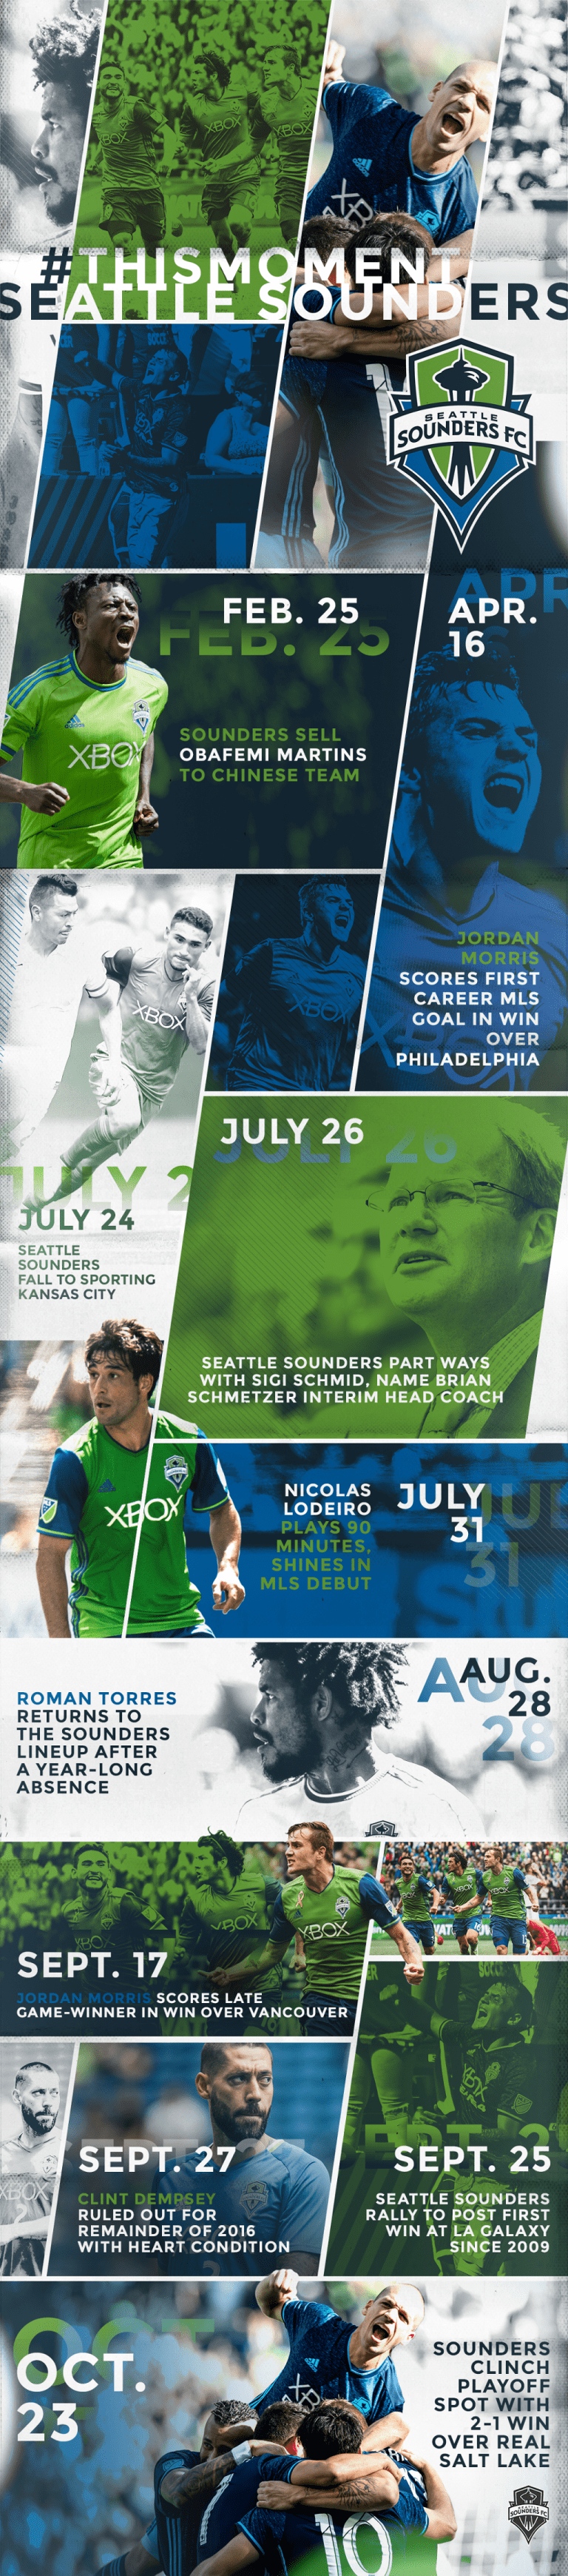 INFOGRAPHIC: Seattle Sounders' journey through the 2016 season - //cdn.thinglink.me/api/image/847912626770935815/1024/10/scaletowidth#tl-847912626770935815;1043138249'